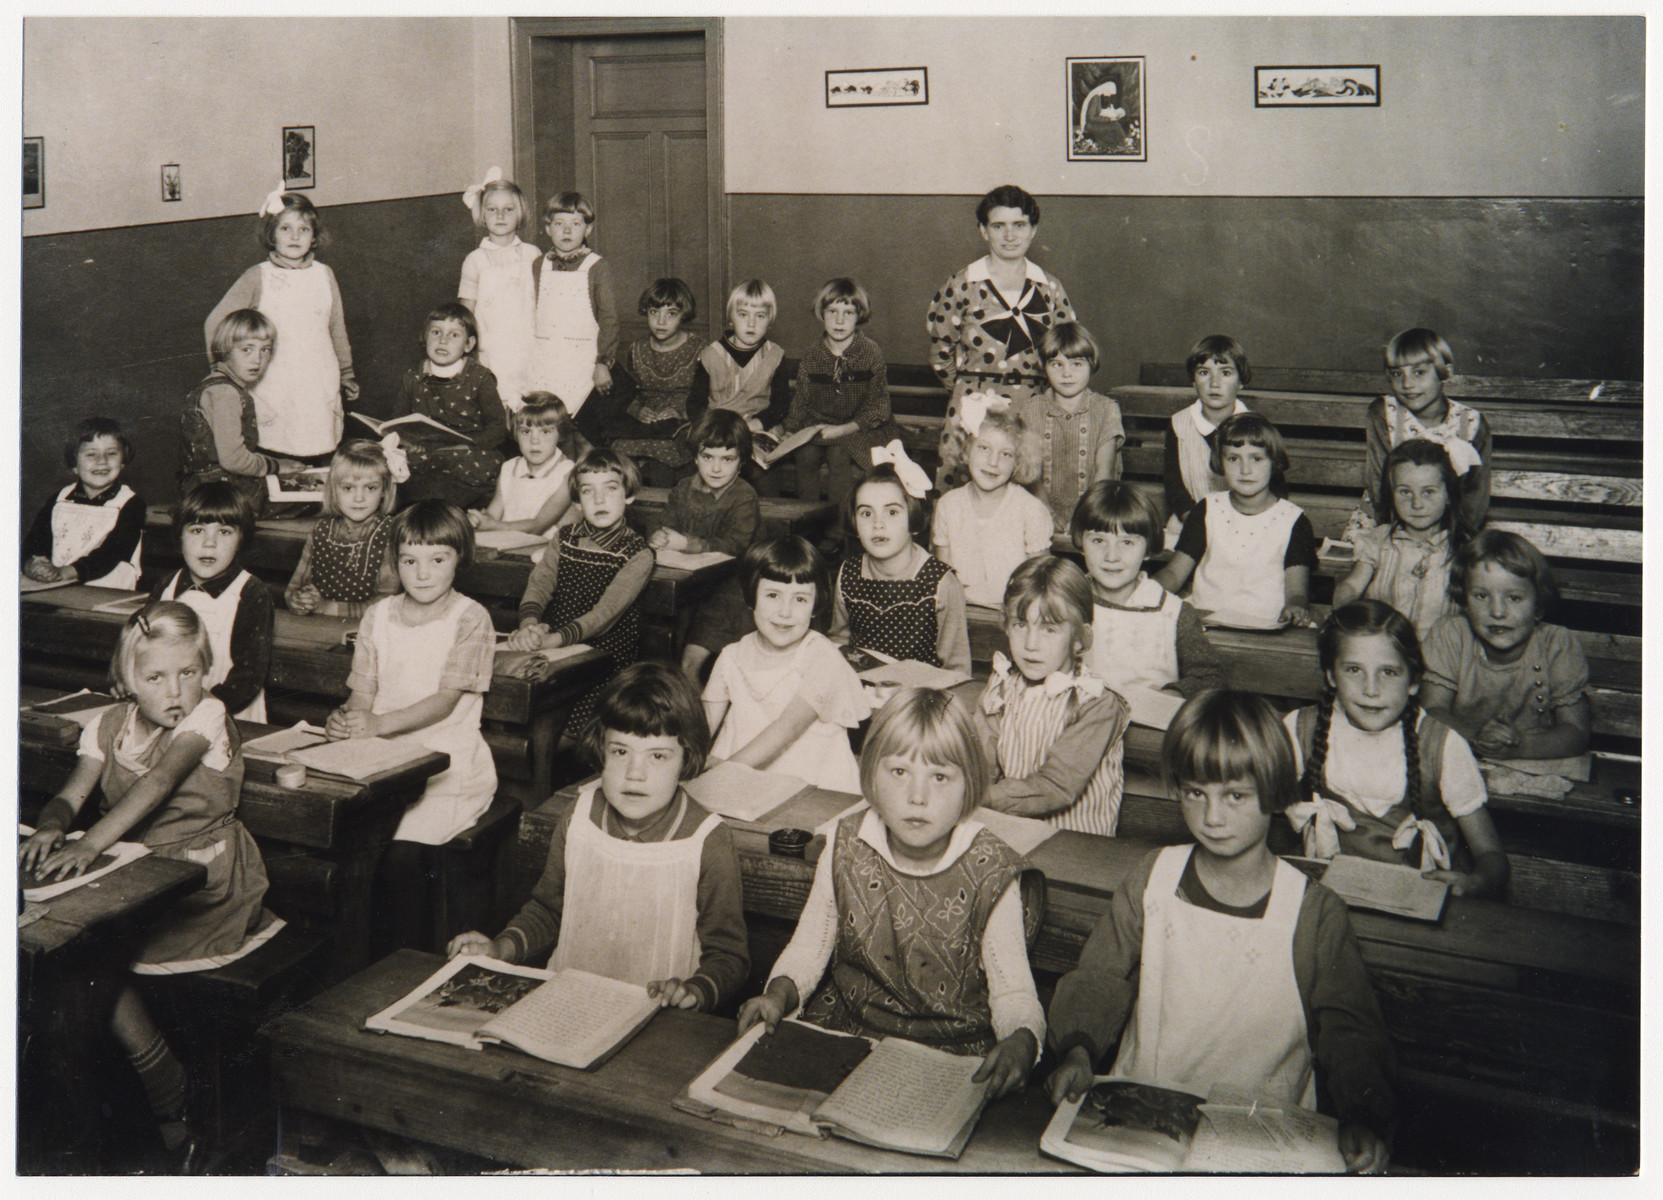 Group portrait of elementary school students seated at their desks.

Among those pictured (front row, second from the left) is .Ilse Kohnn, a cousin of the donor (Kurt Pauly).